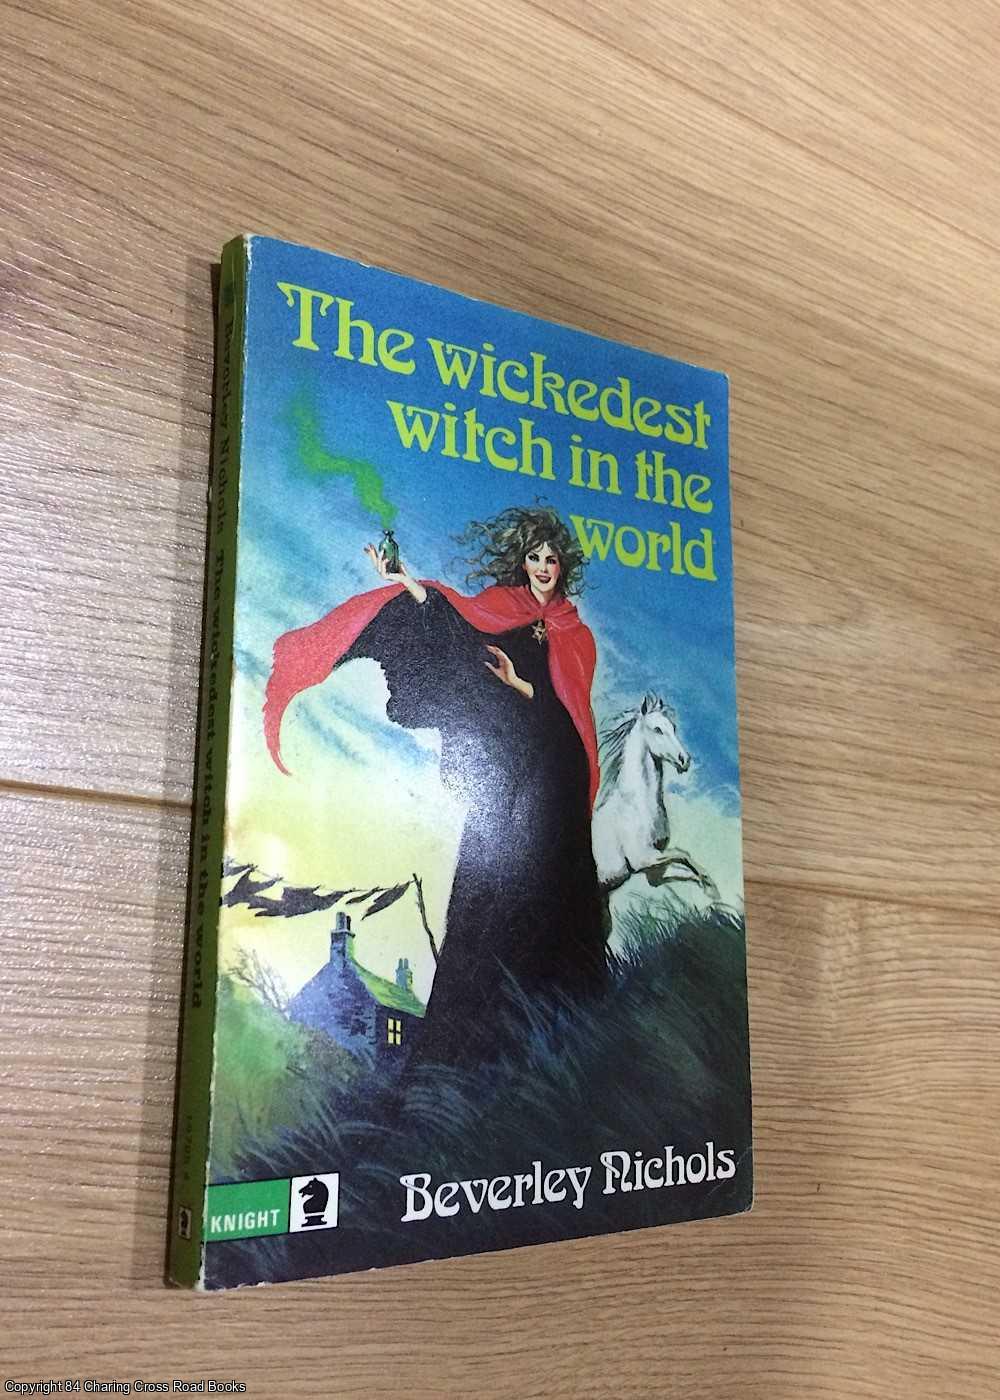 Nichols, Beverley - Wickedest Witch in the World